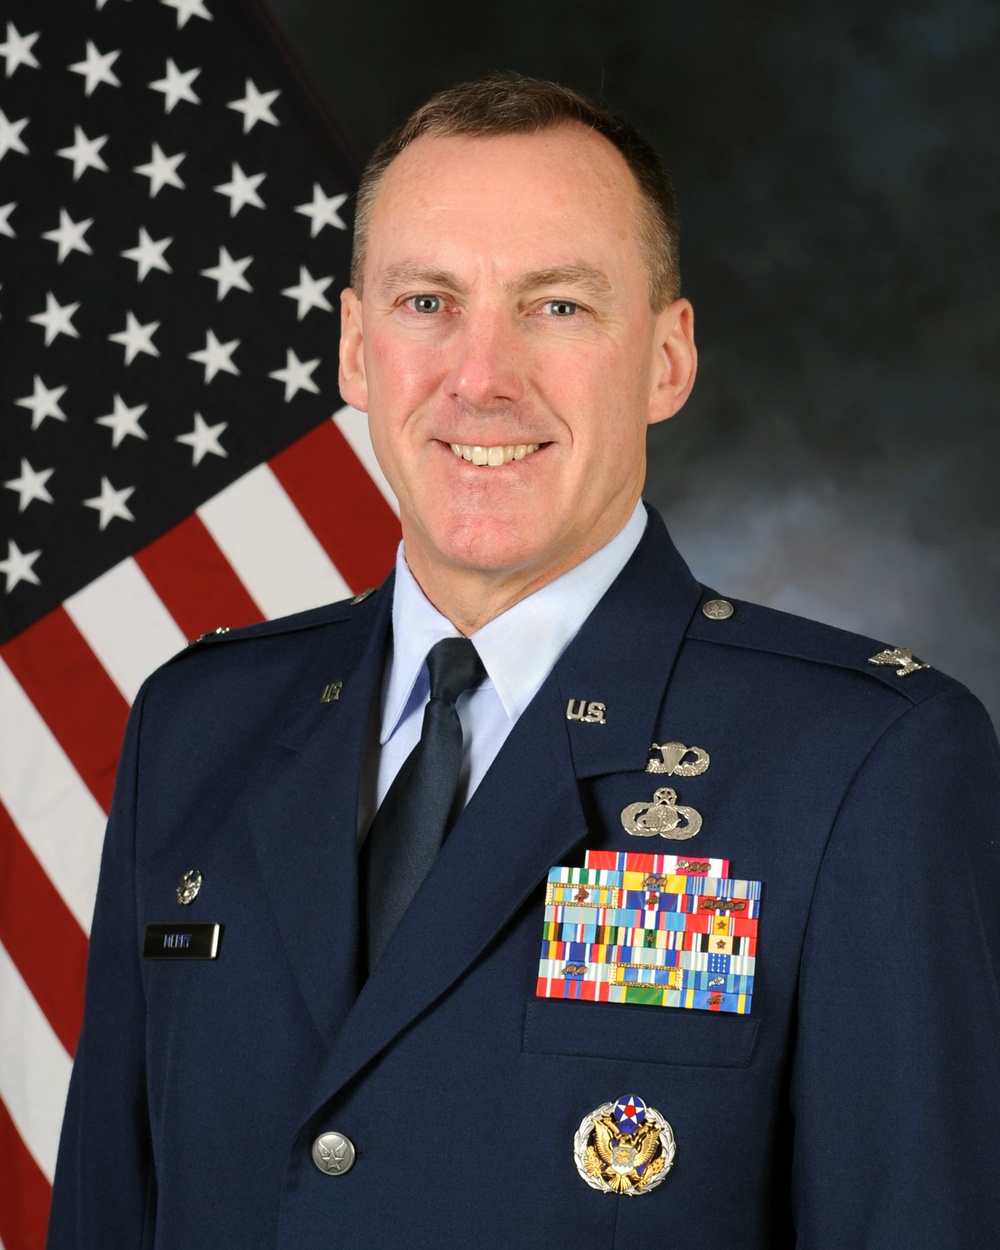 DVIDS - News - Col. Merry the full story